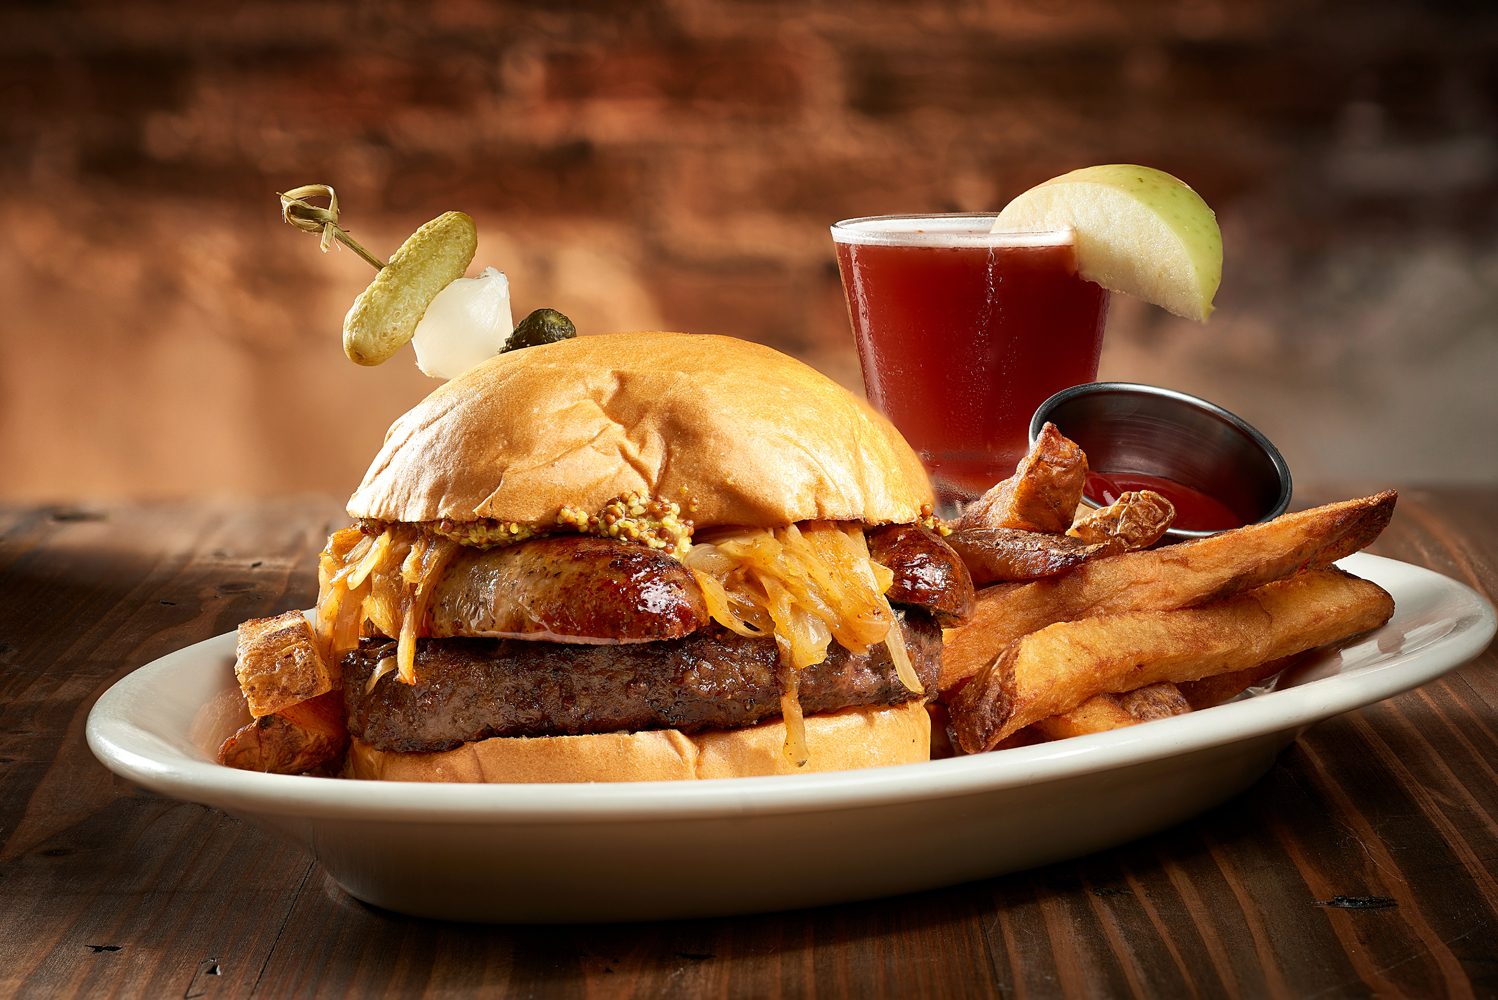 August’s Burger of the Month at The Edison is Here!